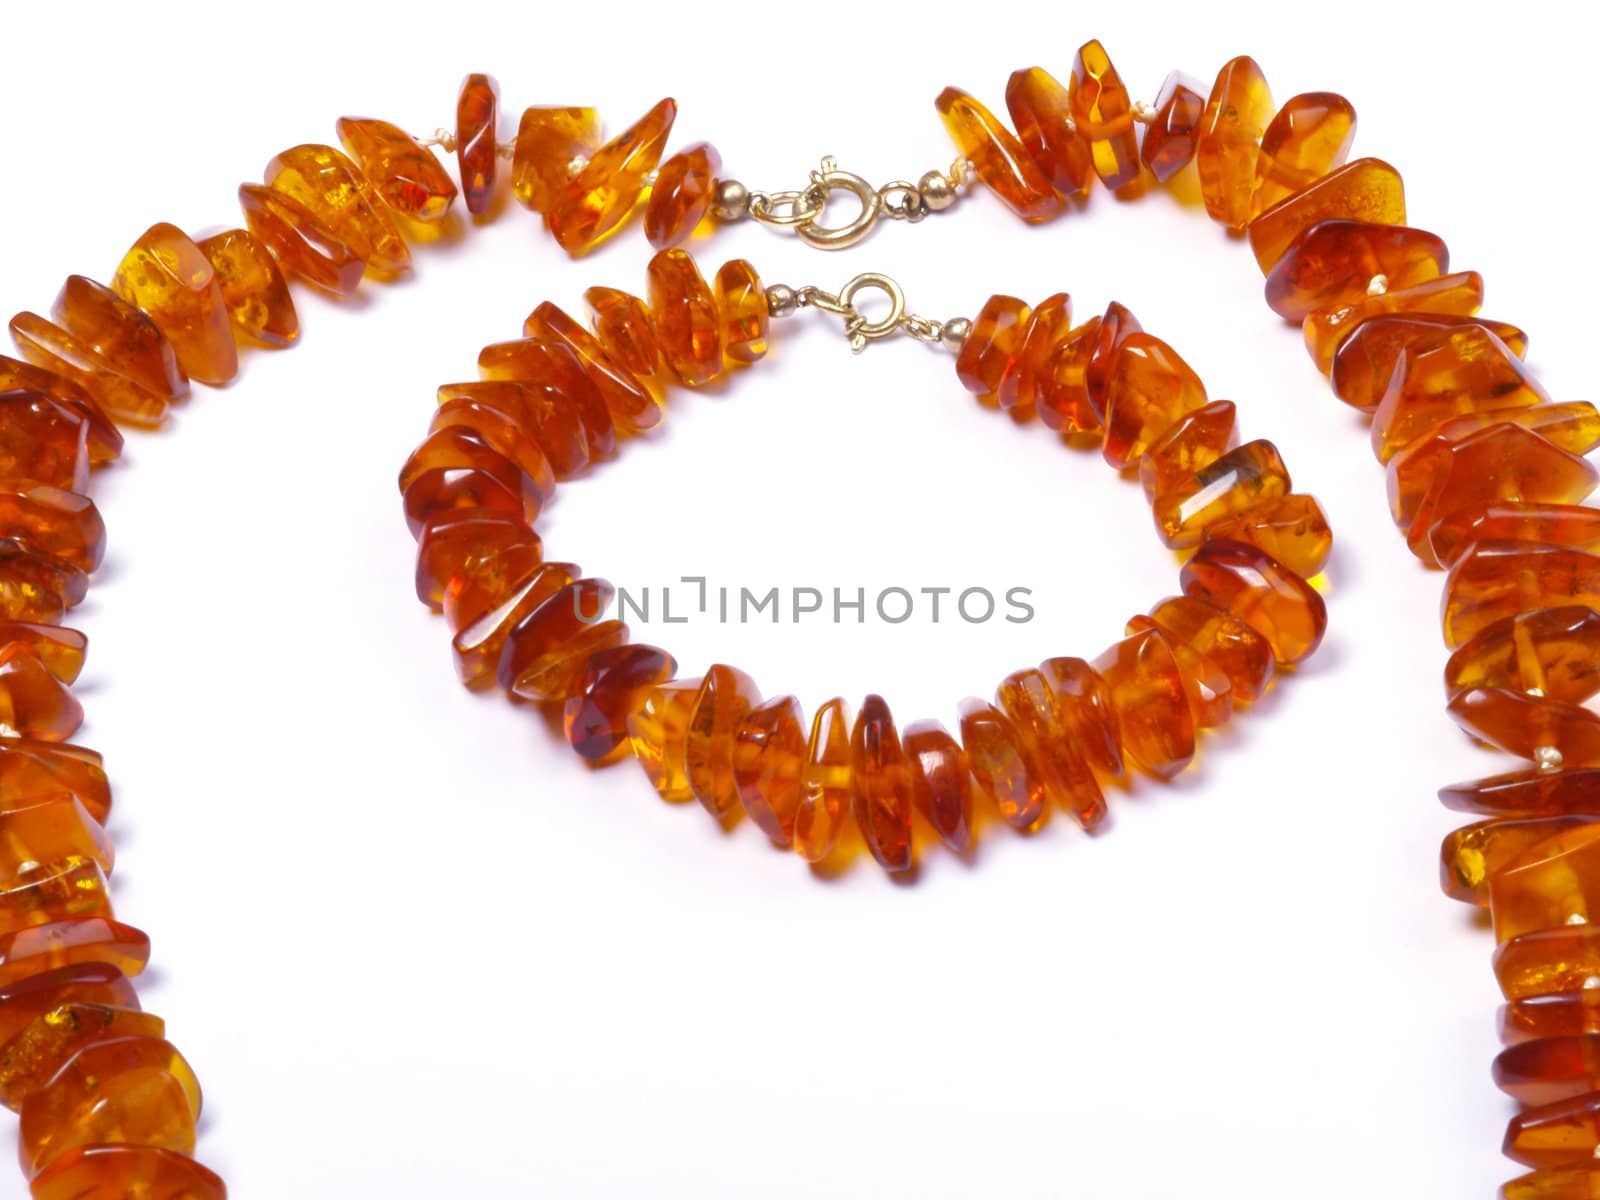 thread of amber bead and wristlet on off- white background close up